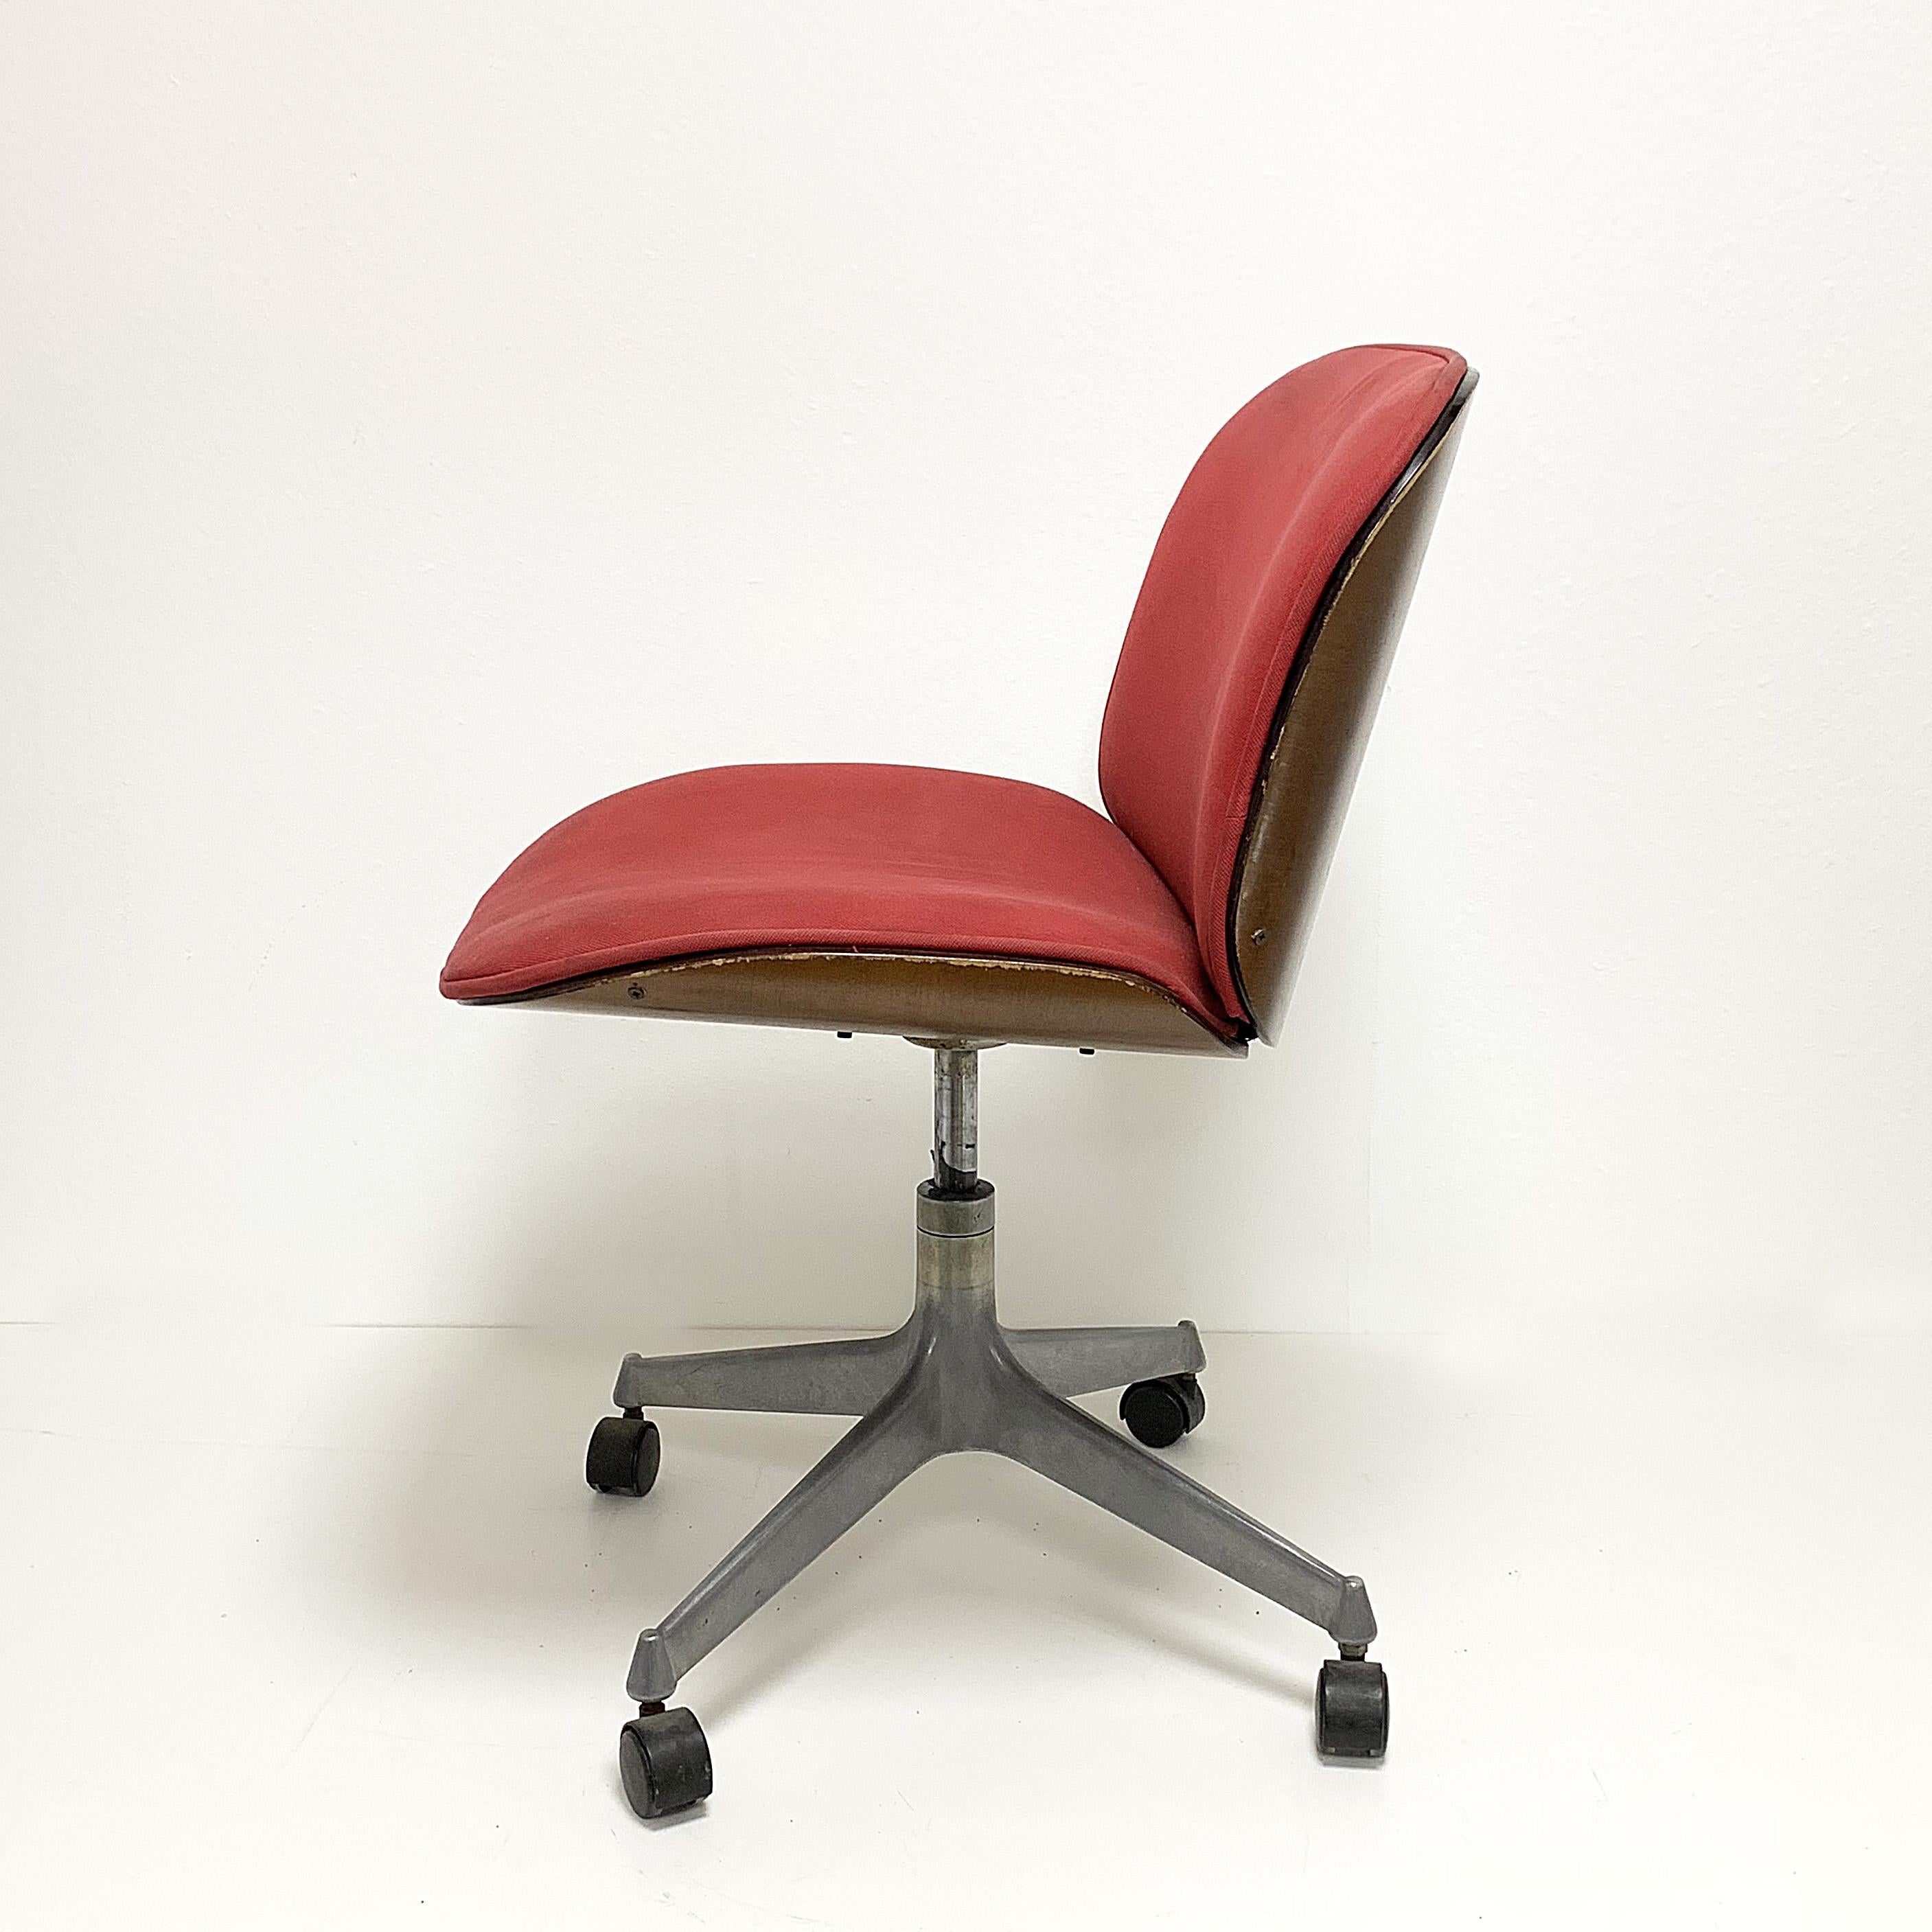 This vintage swivel office chair was designed by Ico Parisi for MIM (Mobili Italiani Moderni - Rome) in the 1950s. It rests on a Four-star steel base. The chair is equipped with self-braking wheels.